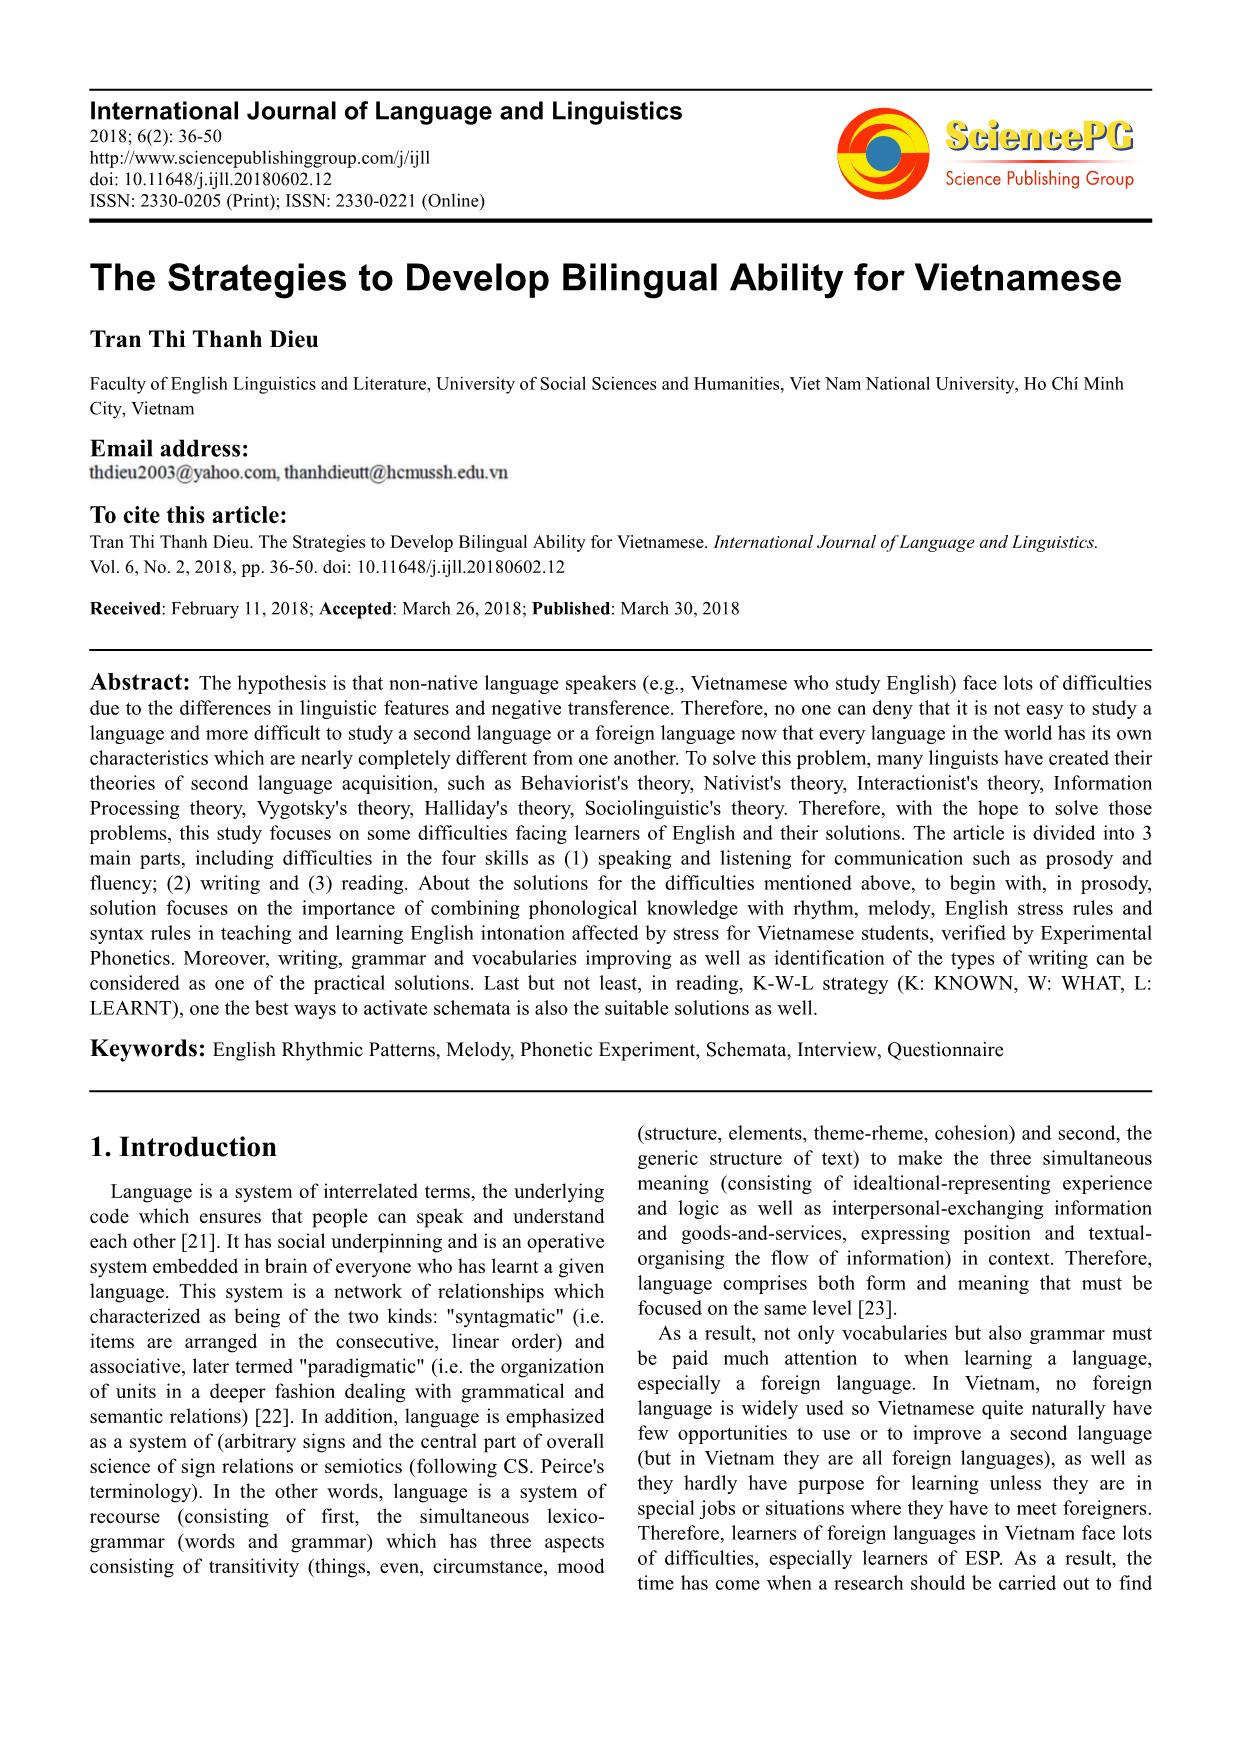 The Strategies to Develop Bilingual Ability for Vietnamese trang 1